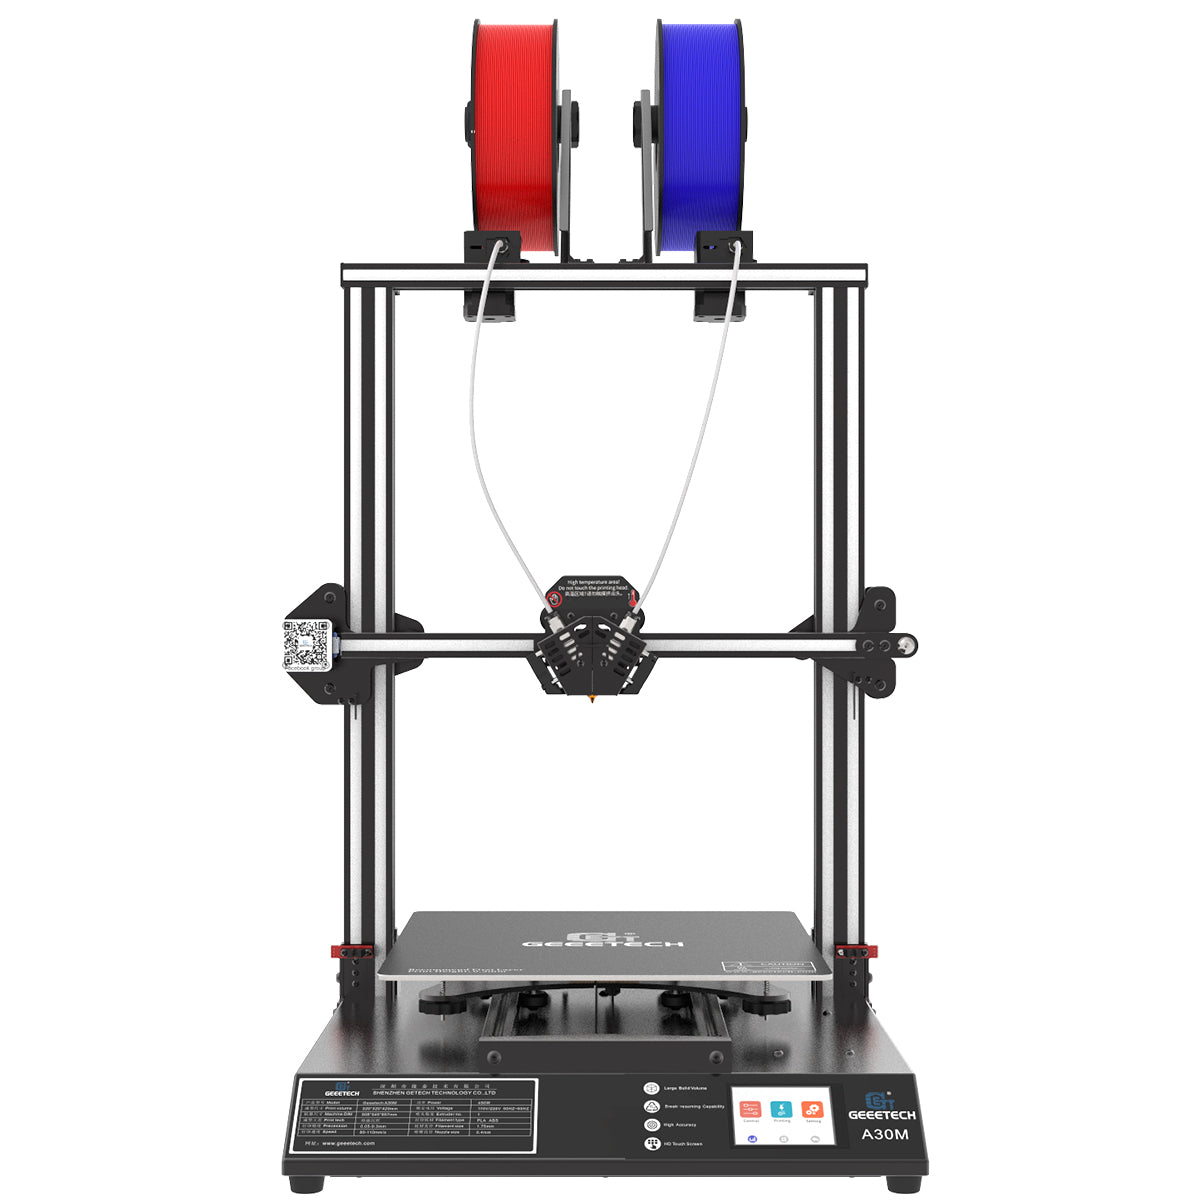 Geeetech new release upgrading auto leveling power filament sensor touch screen 3d multicolor 3d printer | Electrr Inc